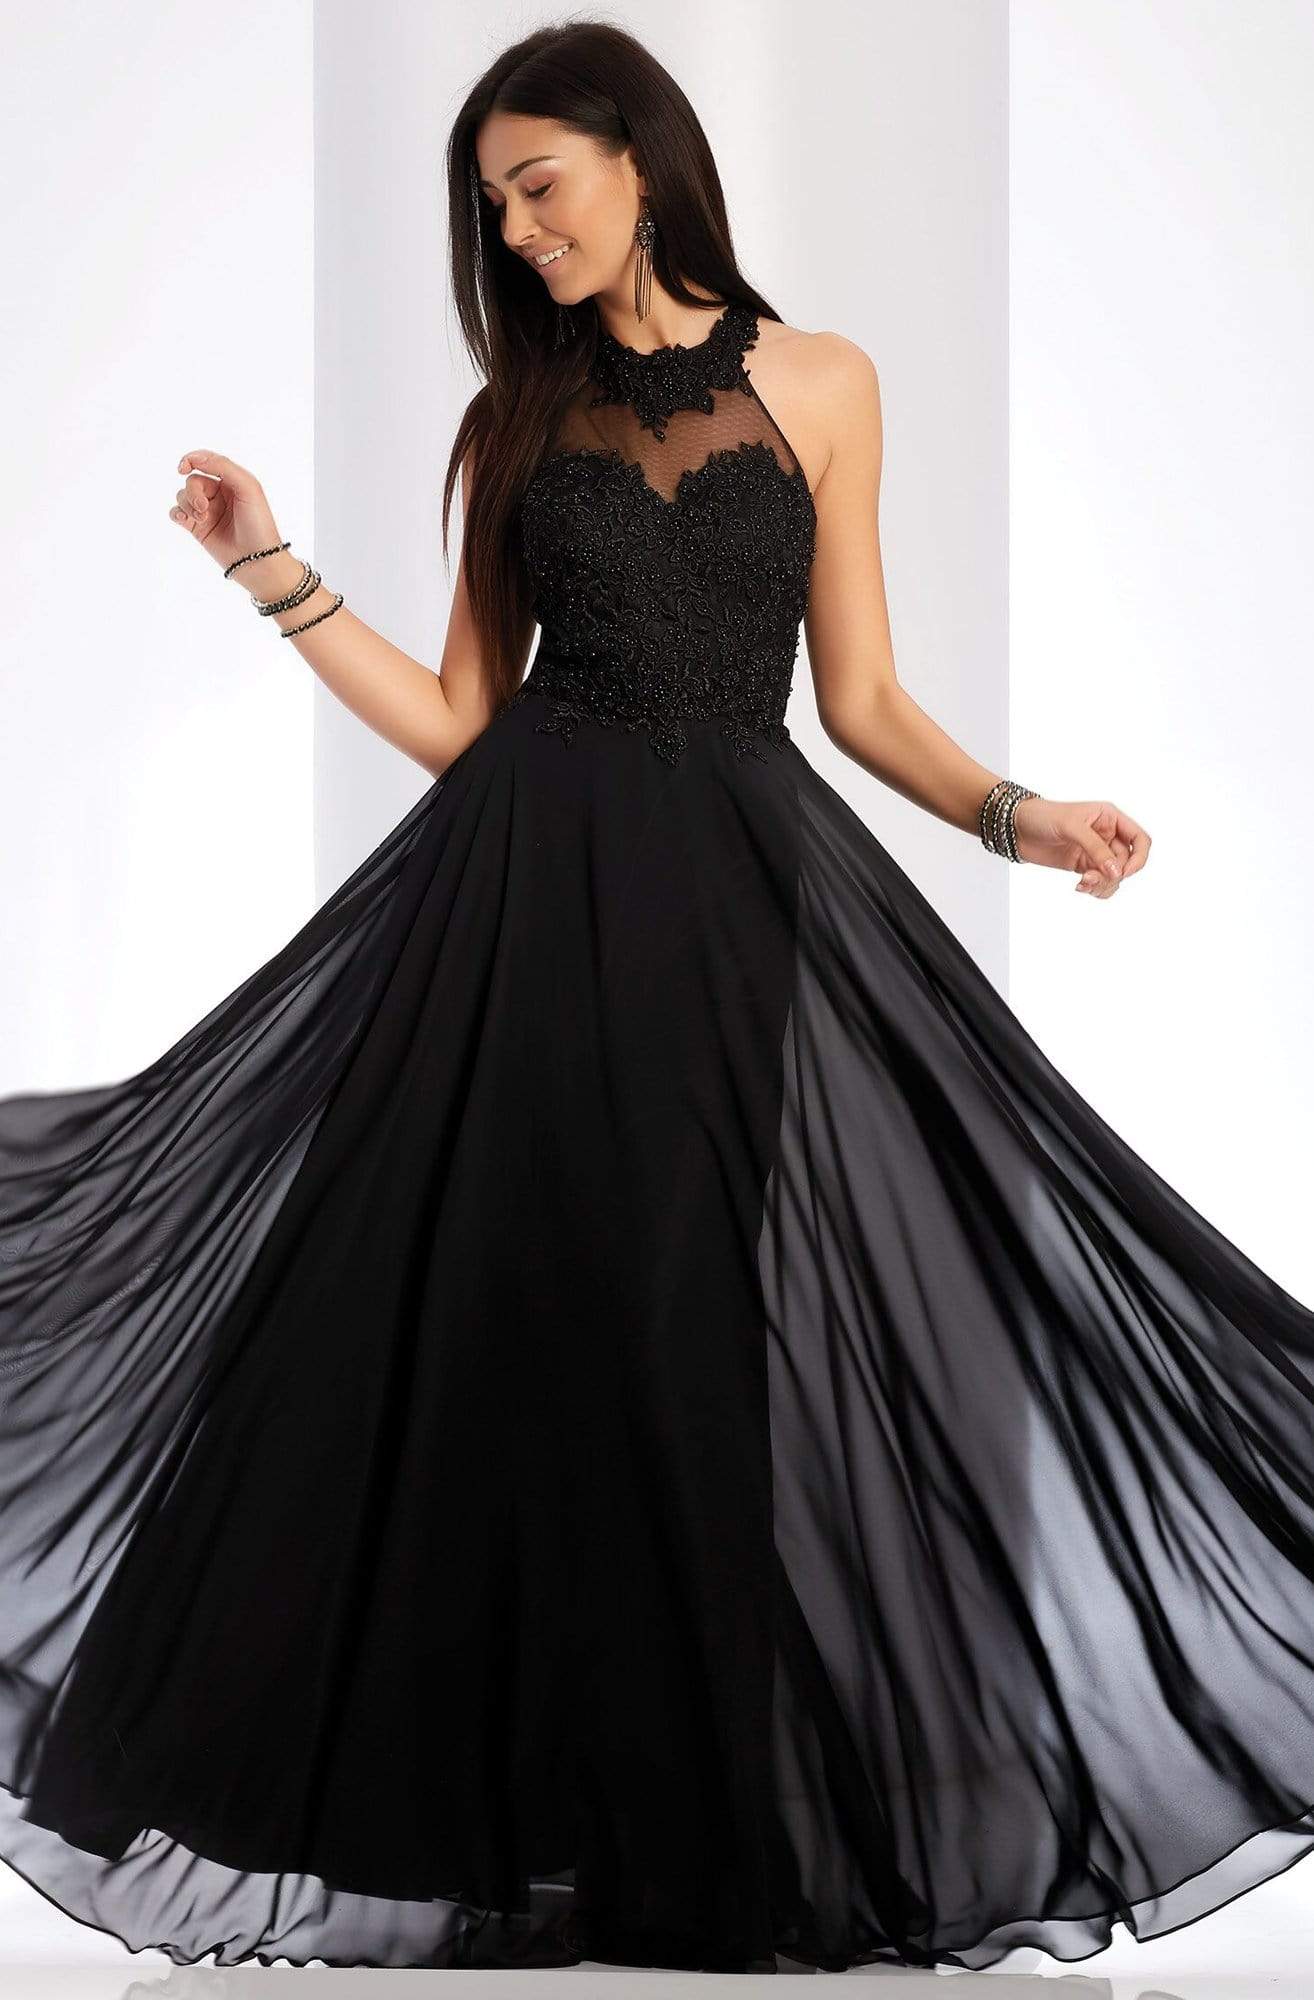 Clarisse - 3528 Jeweled Lace Applique Halter Gown Special Occasion Dress 0 / Black